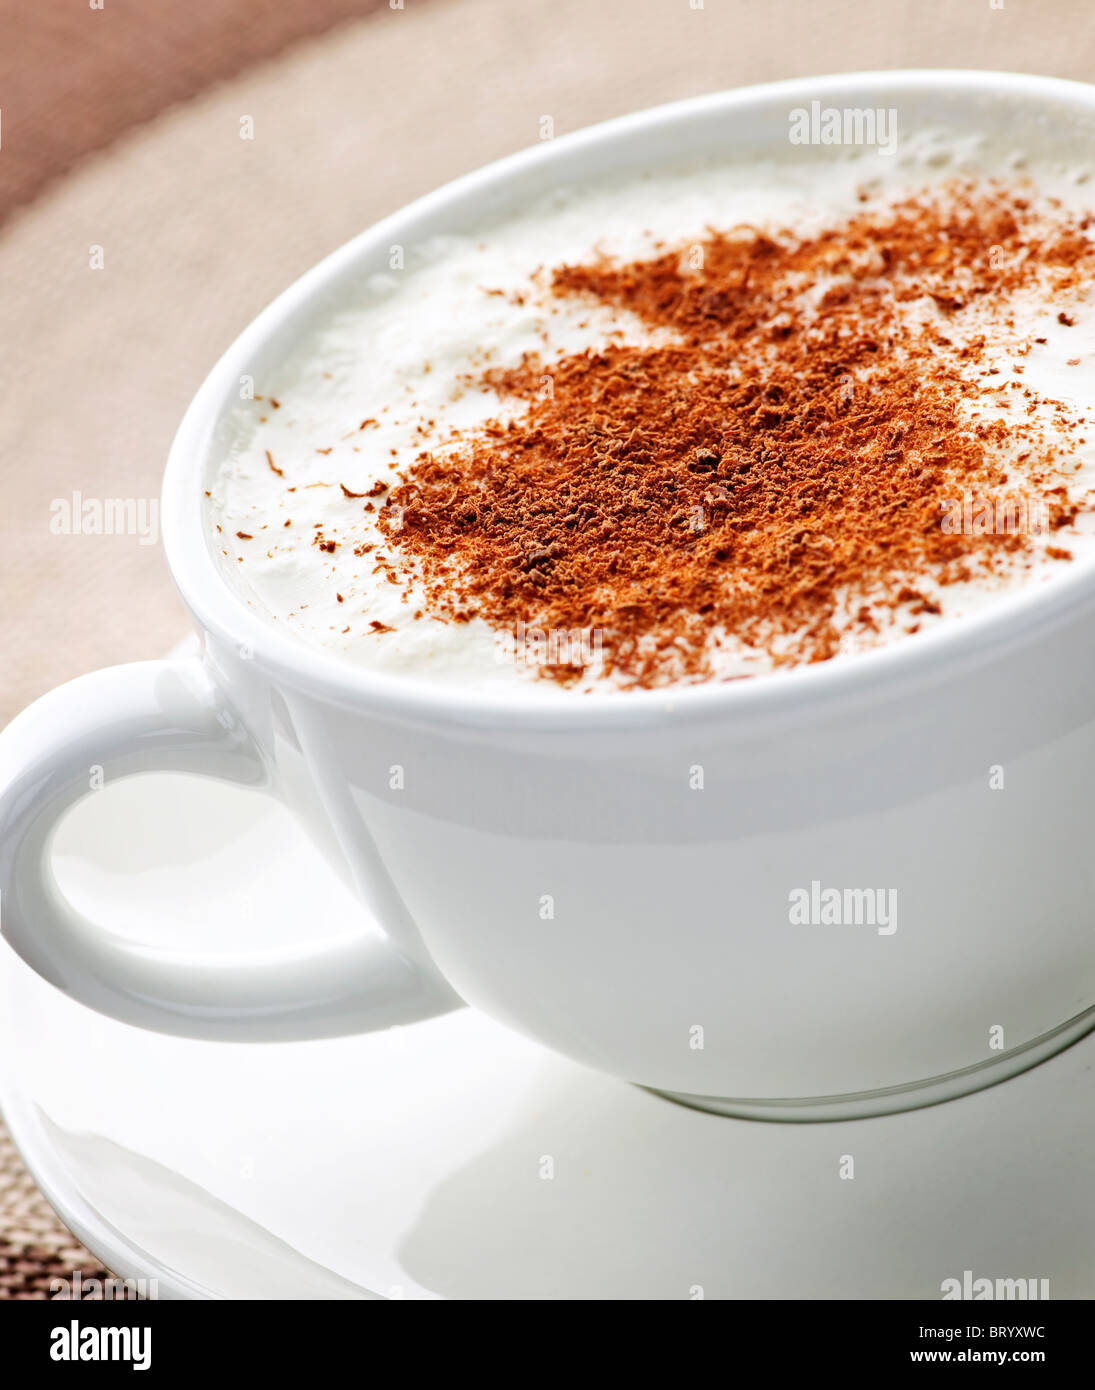 Cappuccino or latte coffee in cup with frothed milk and cookies Stock Photo